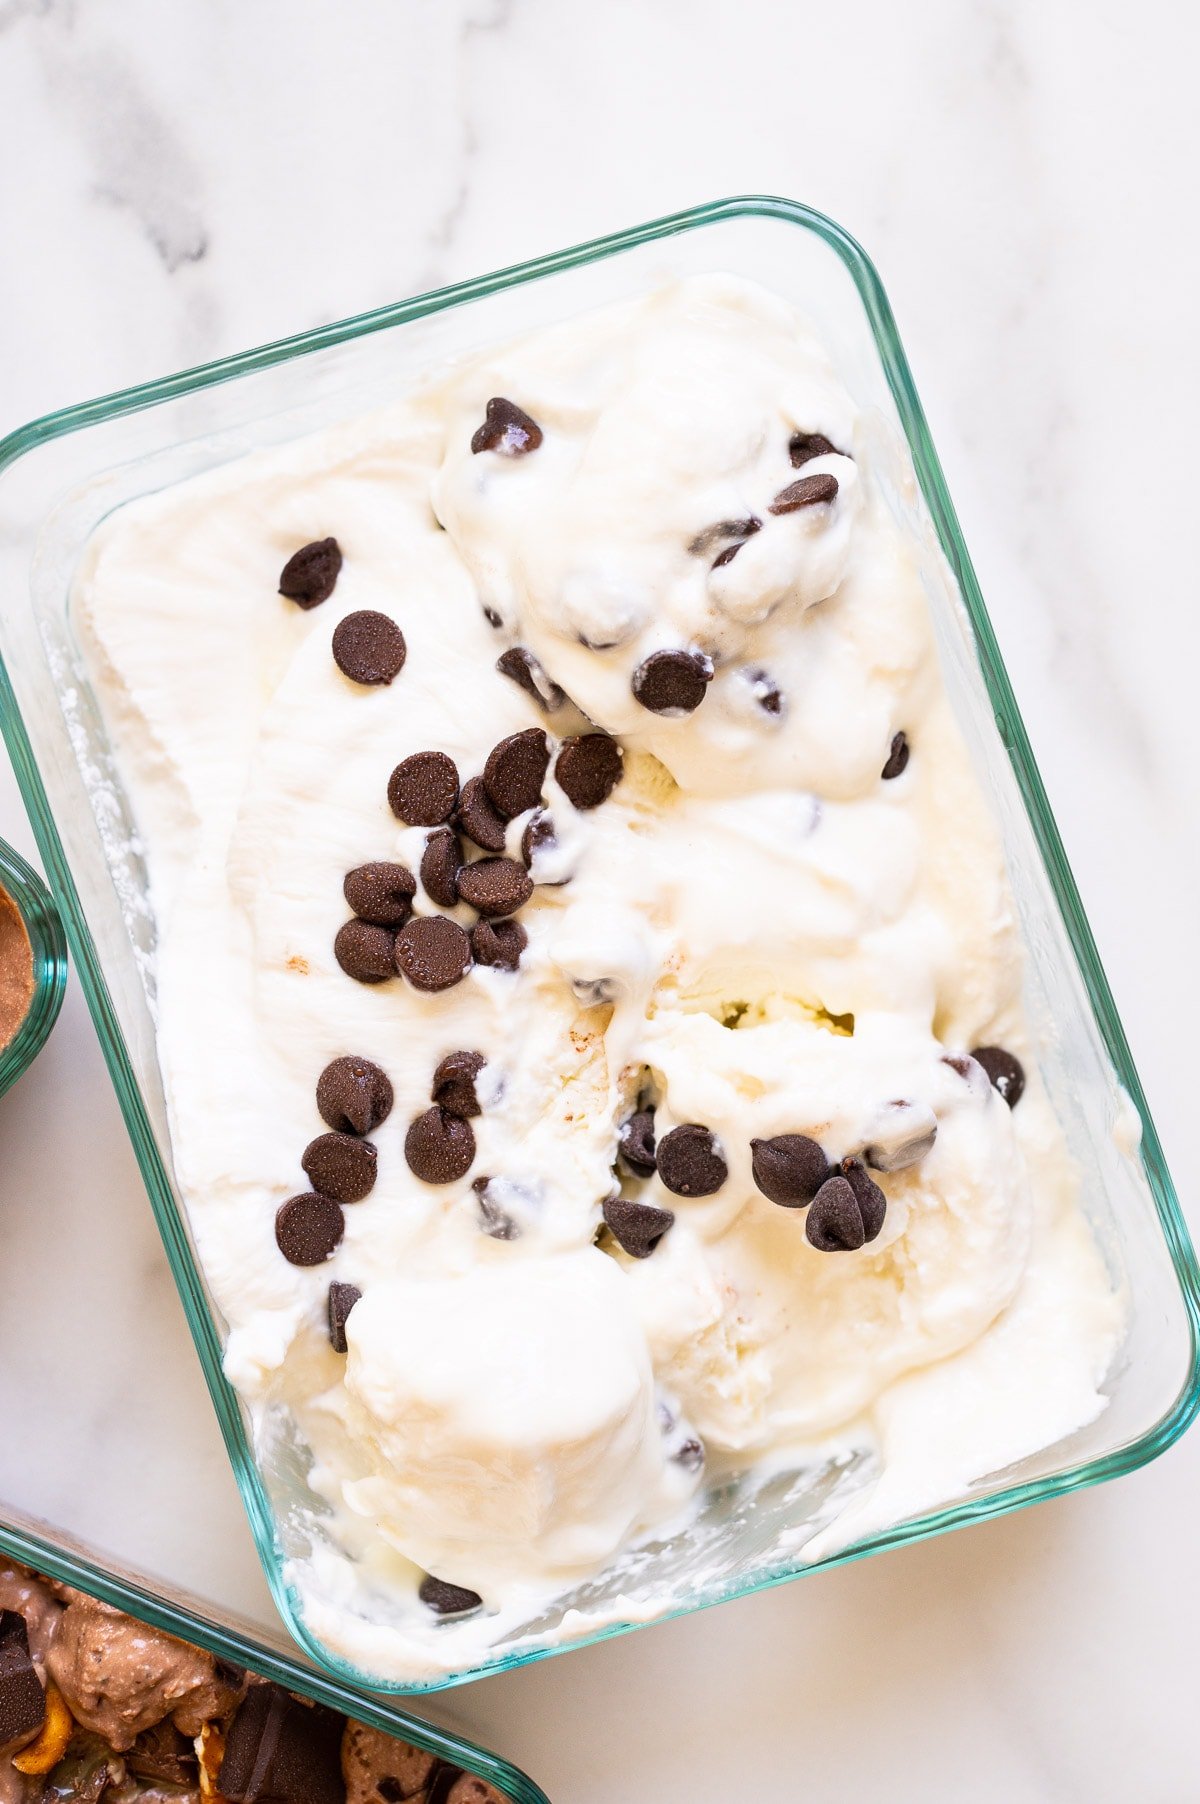 Cottage cheese ice cream recipe with chocolate chips in glass container.